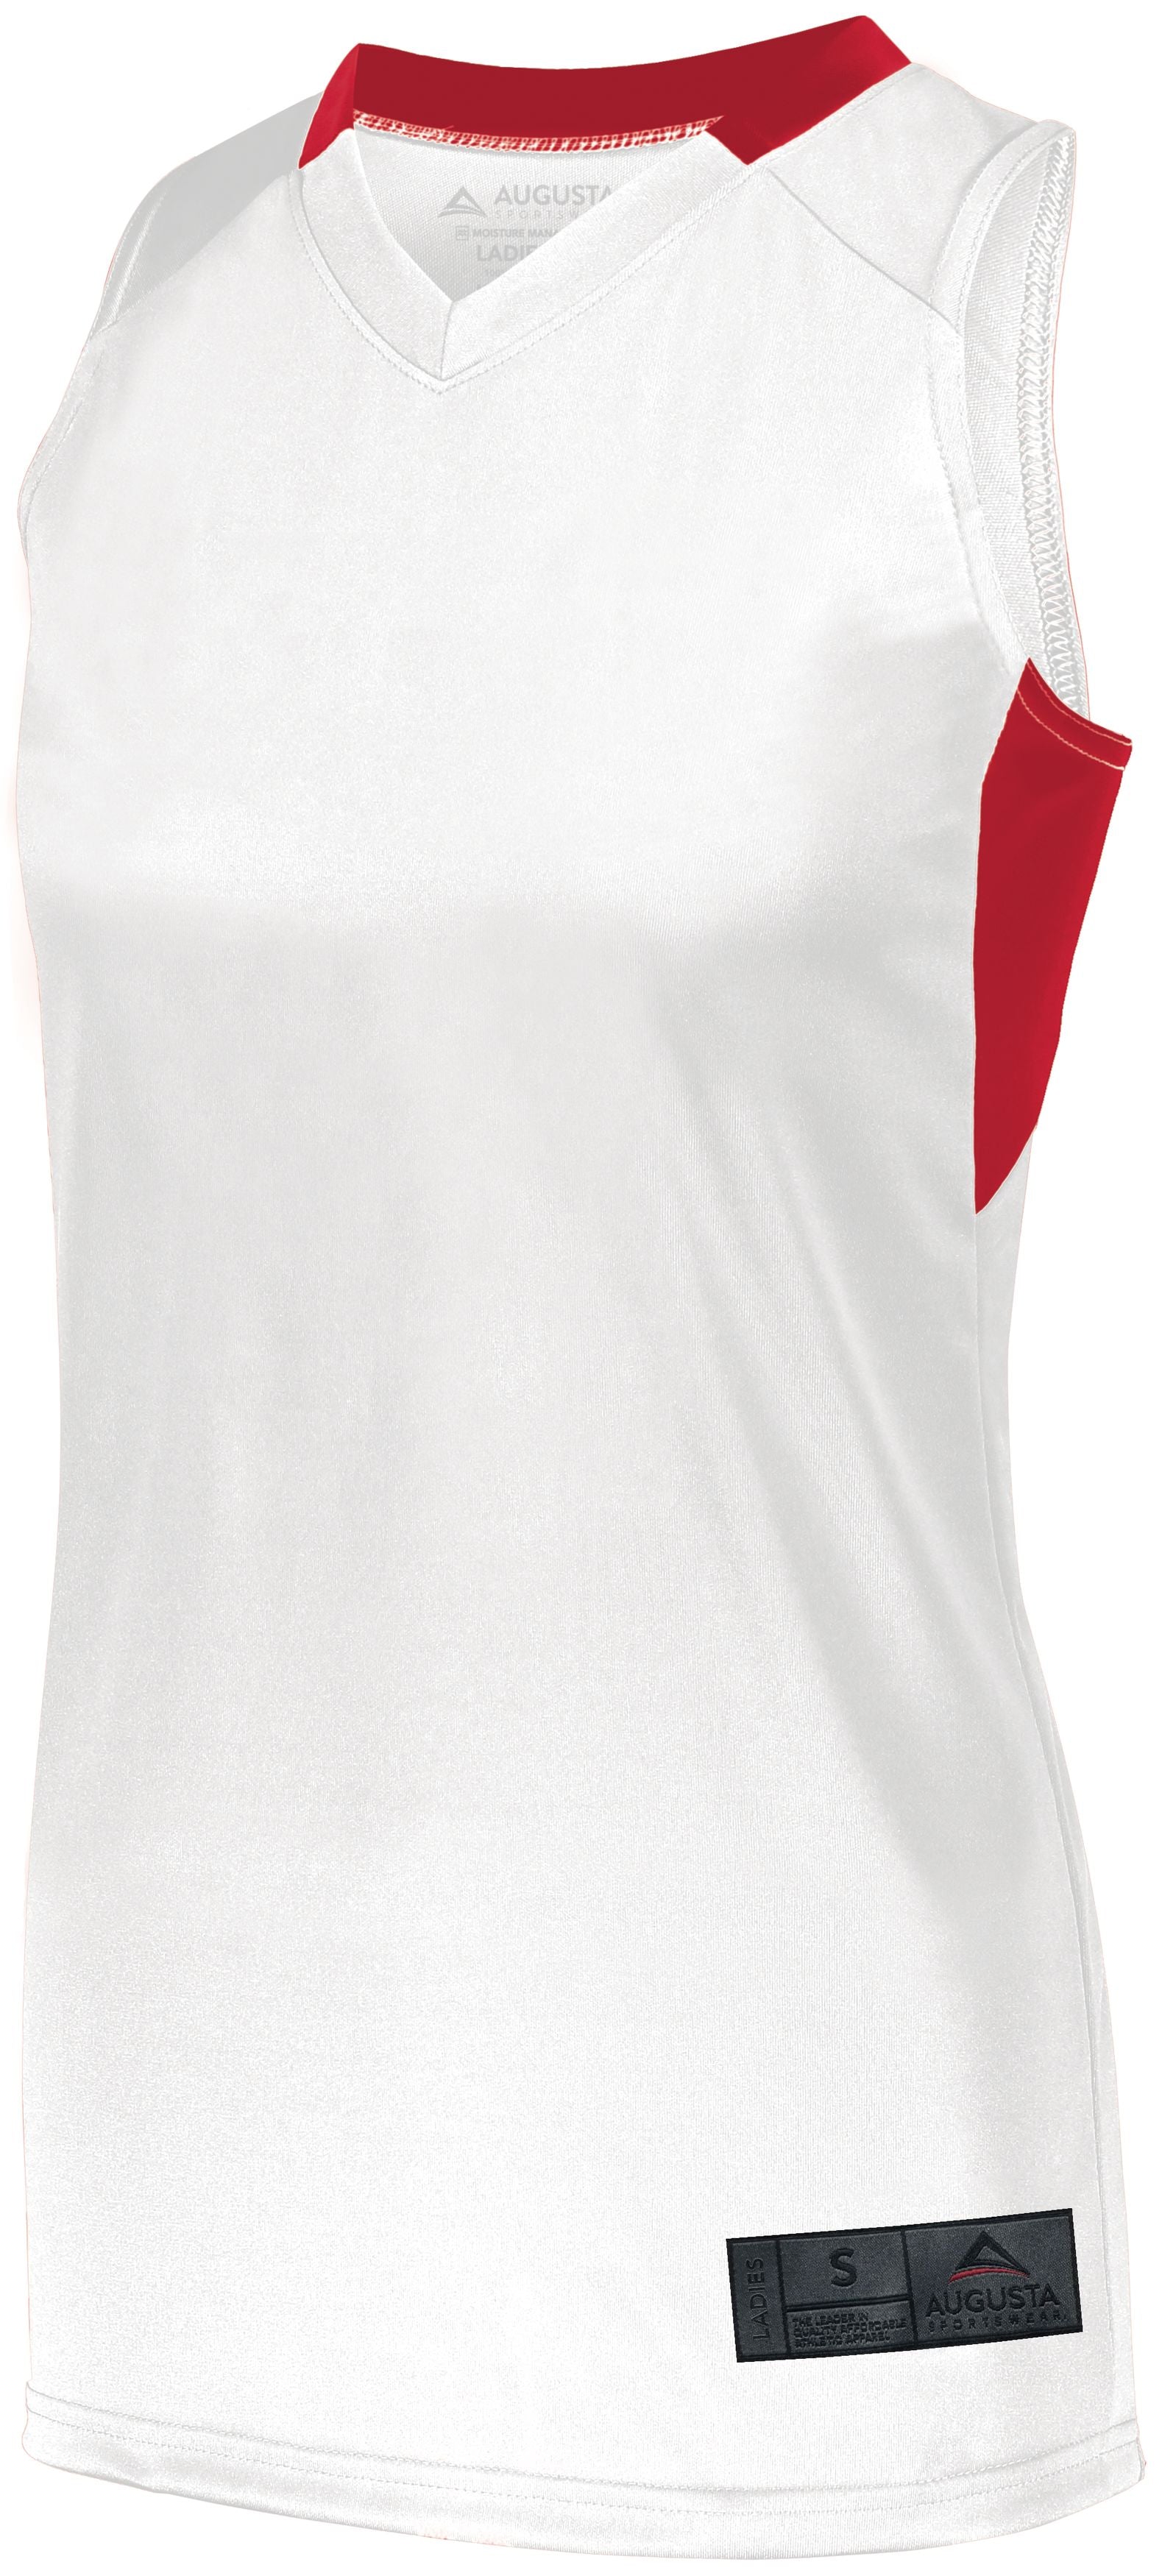 Augusta Sportswear Ladies Step-Back Basketball Jersey in White/Red  -Part of the Ladies, Ladies-Jersey, Augusta-Products, Basketball, Shirts, All-Sports, All-Sports-1 product lines at KanaleyCreations.com